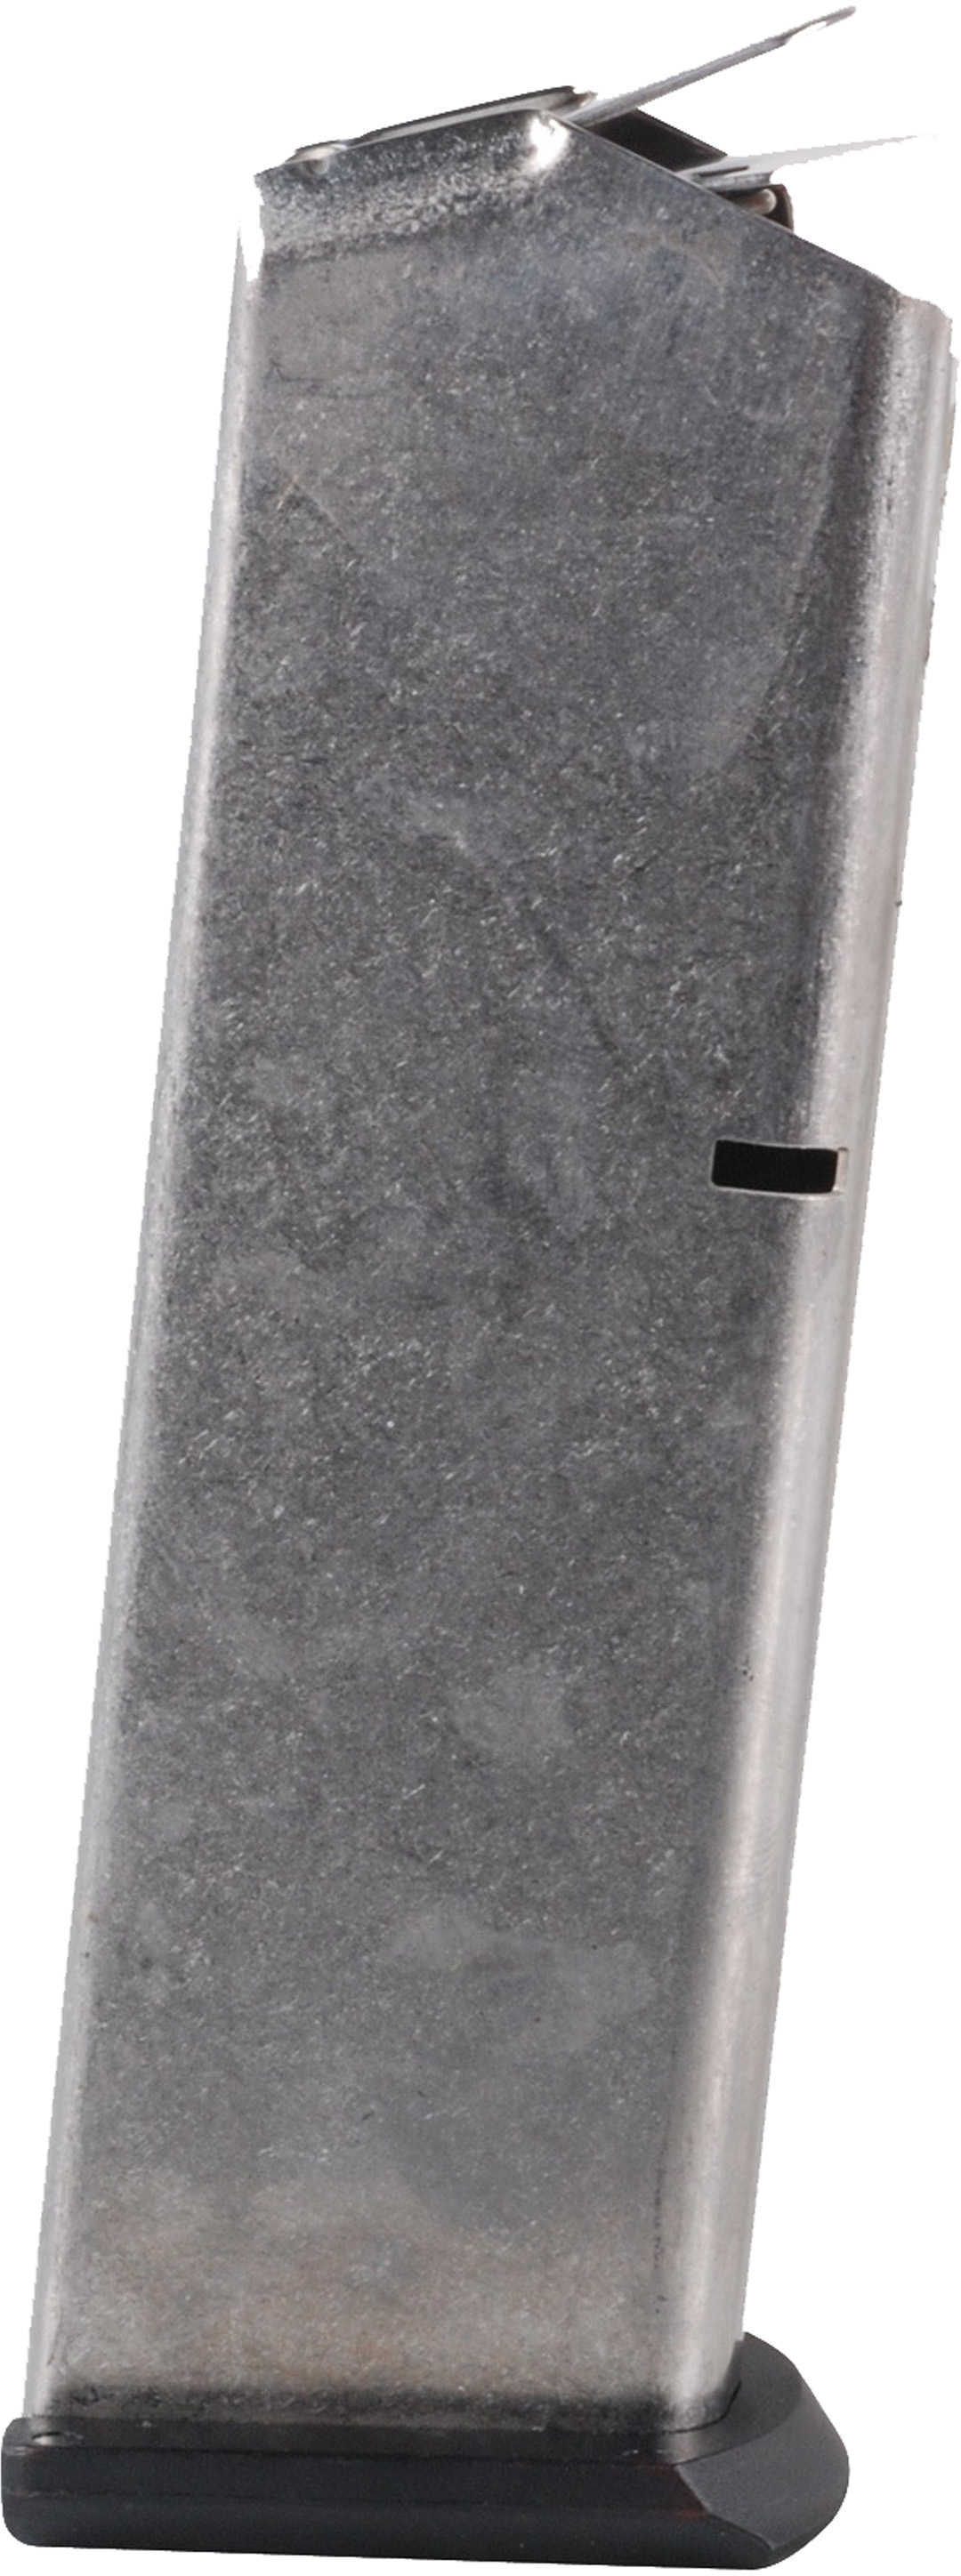 Ruger® P345 8 Rd Magazine Stainless